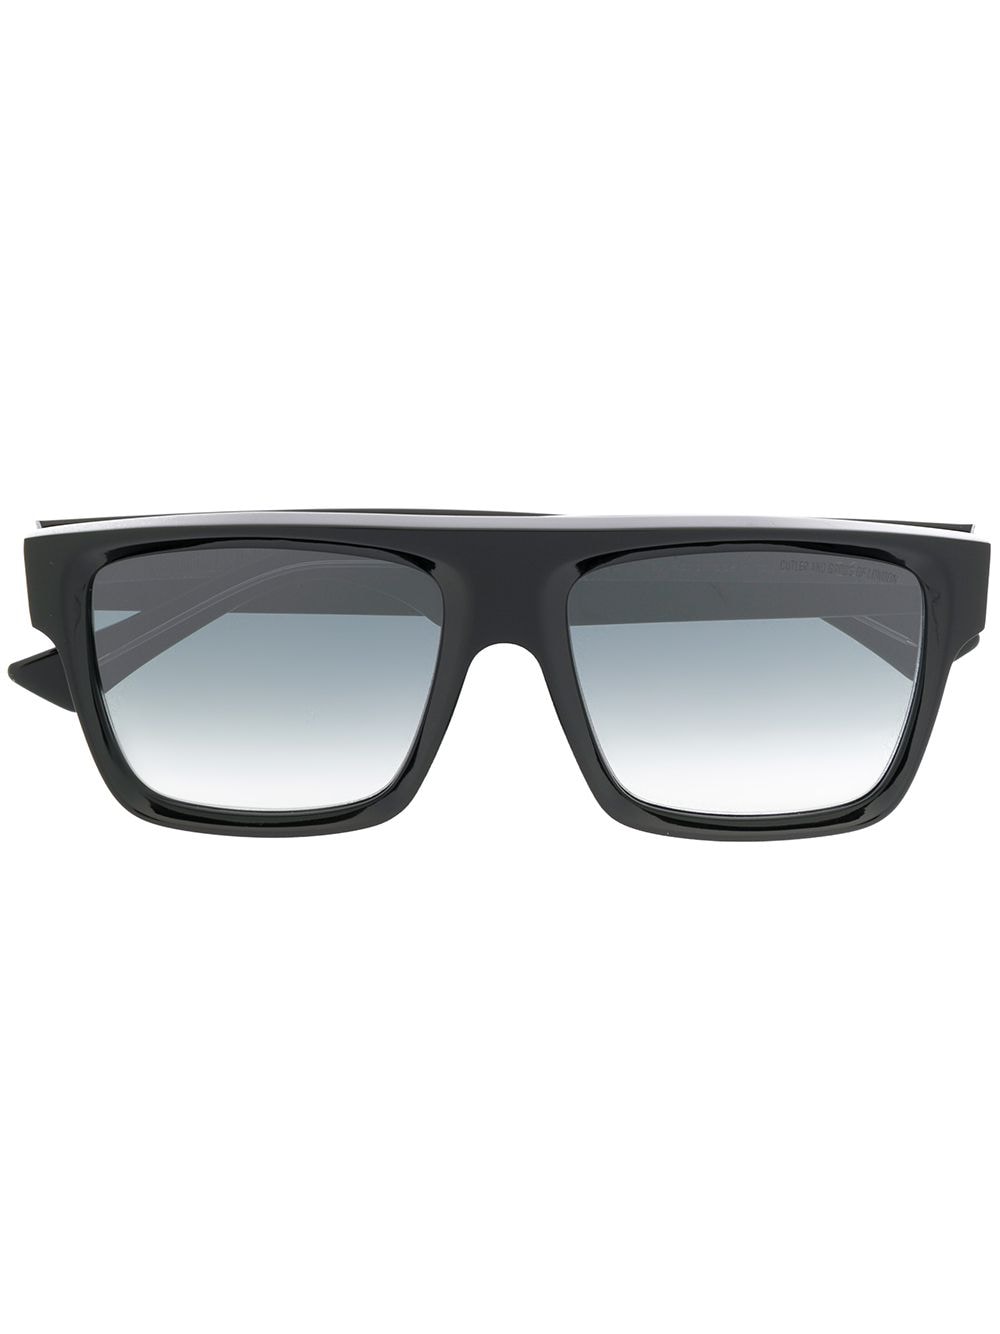 Cutler And Gross 1341-01 Sunglasses In Black